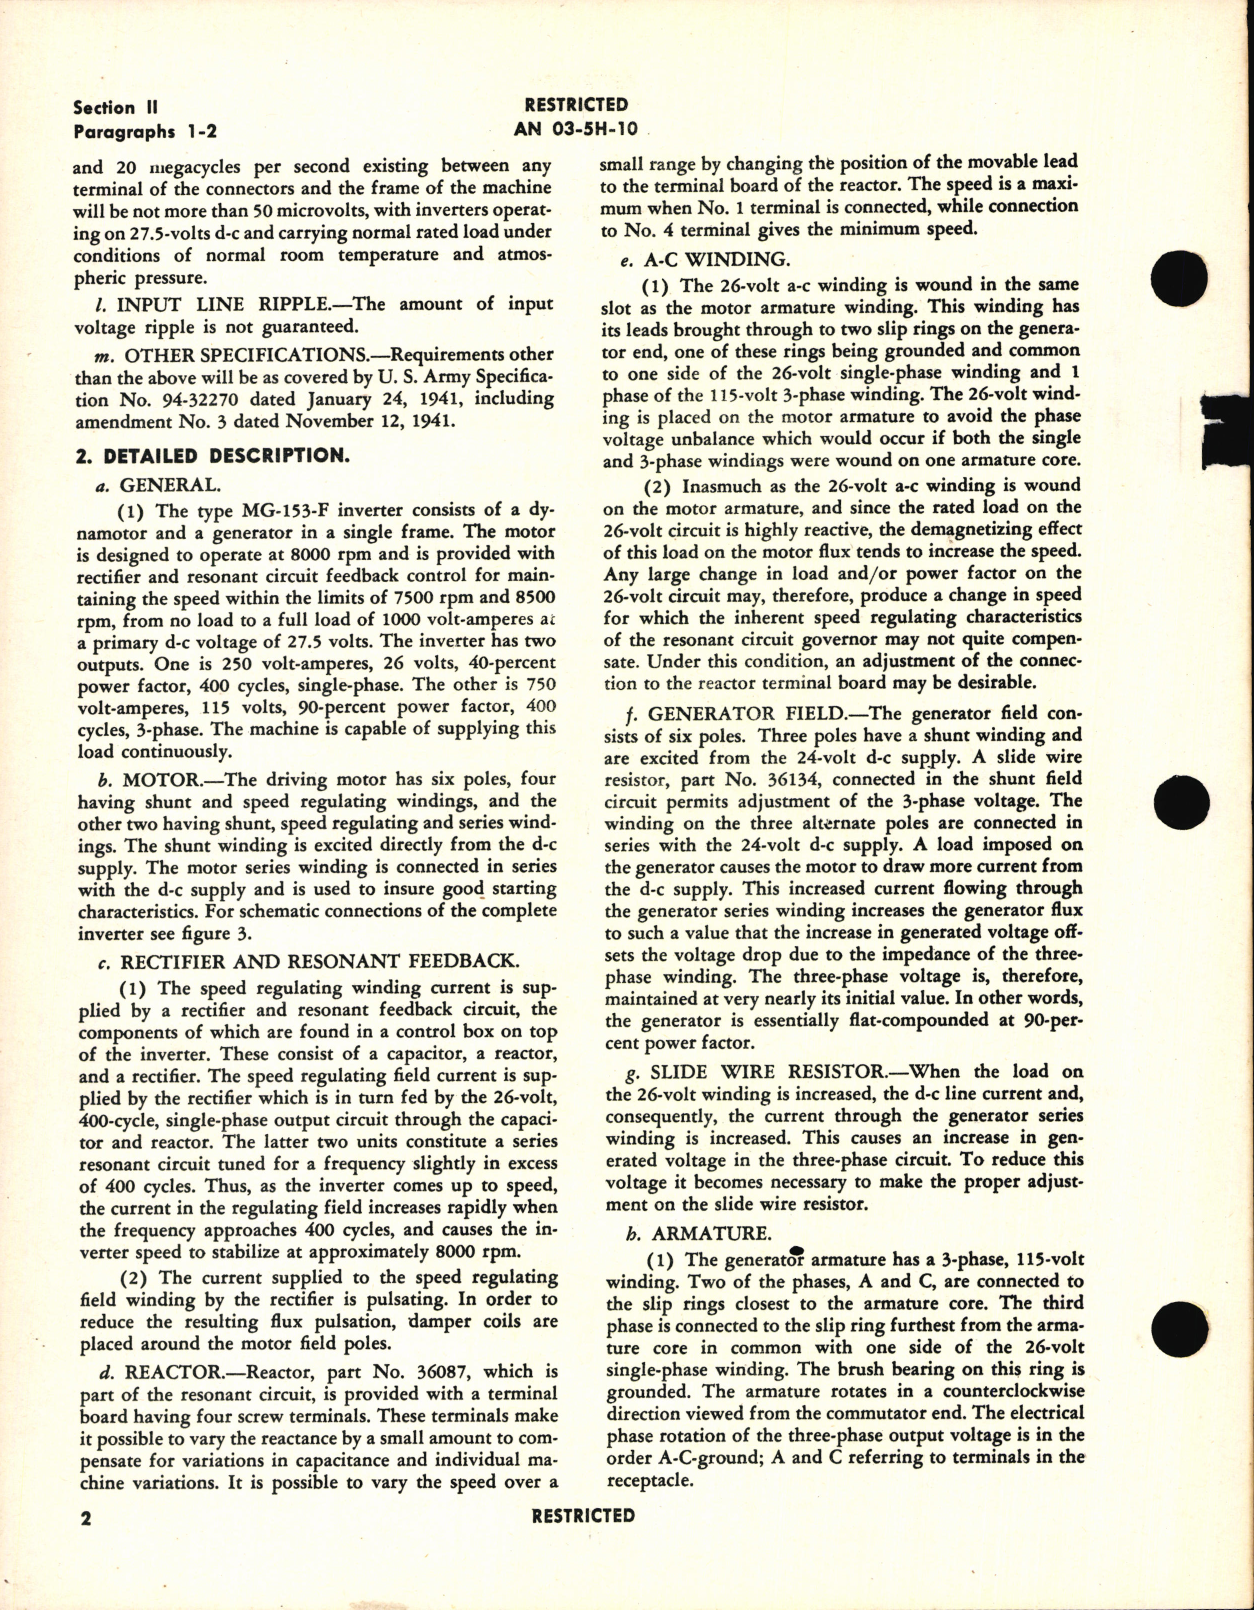 Sample page 6 from AirCorps Library document: Operation, Service & Overhaul Instructions with Parts Catalog for Inverter Type MG-153F (R88-I-4220)